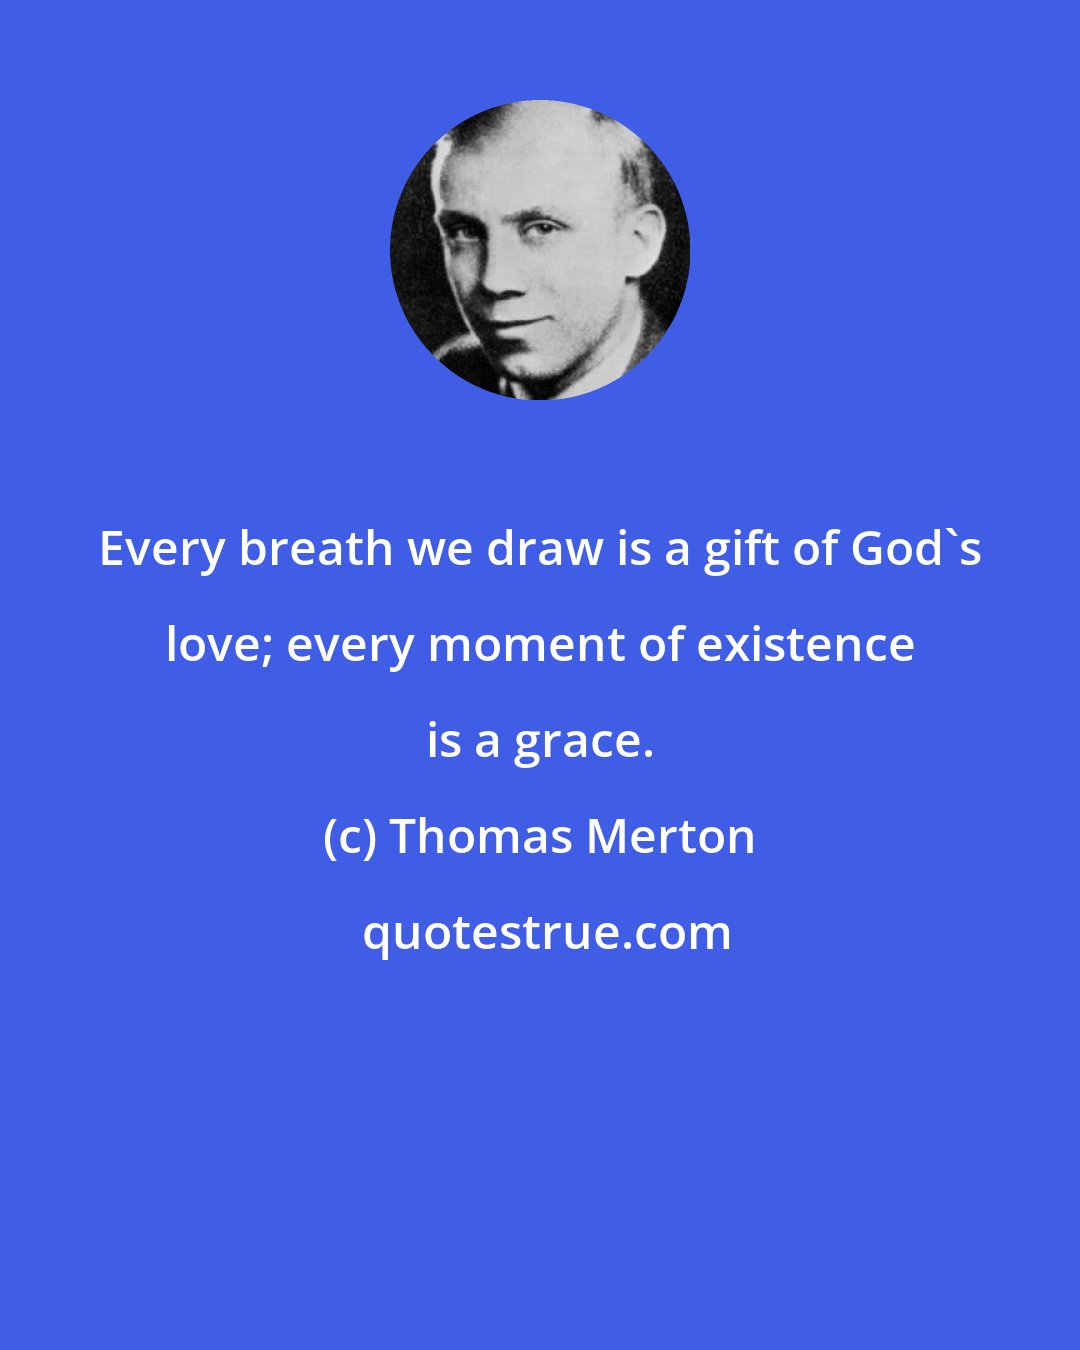 Thomas Merton: Every breath we draw is a gift of God's love; every moment of existence is a grace.